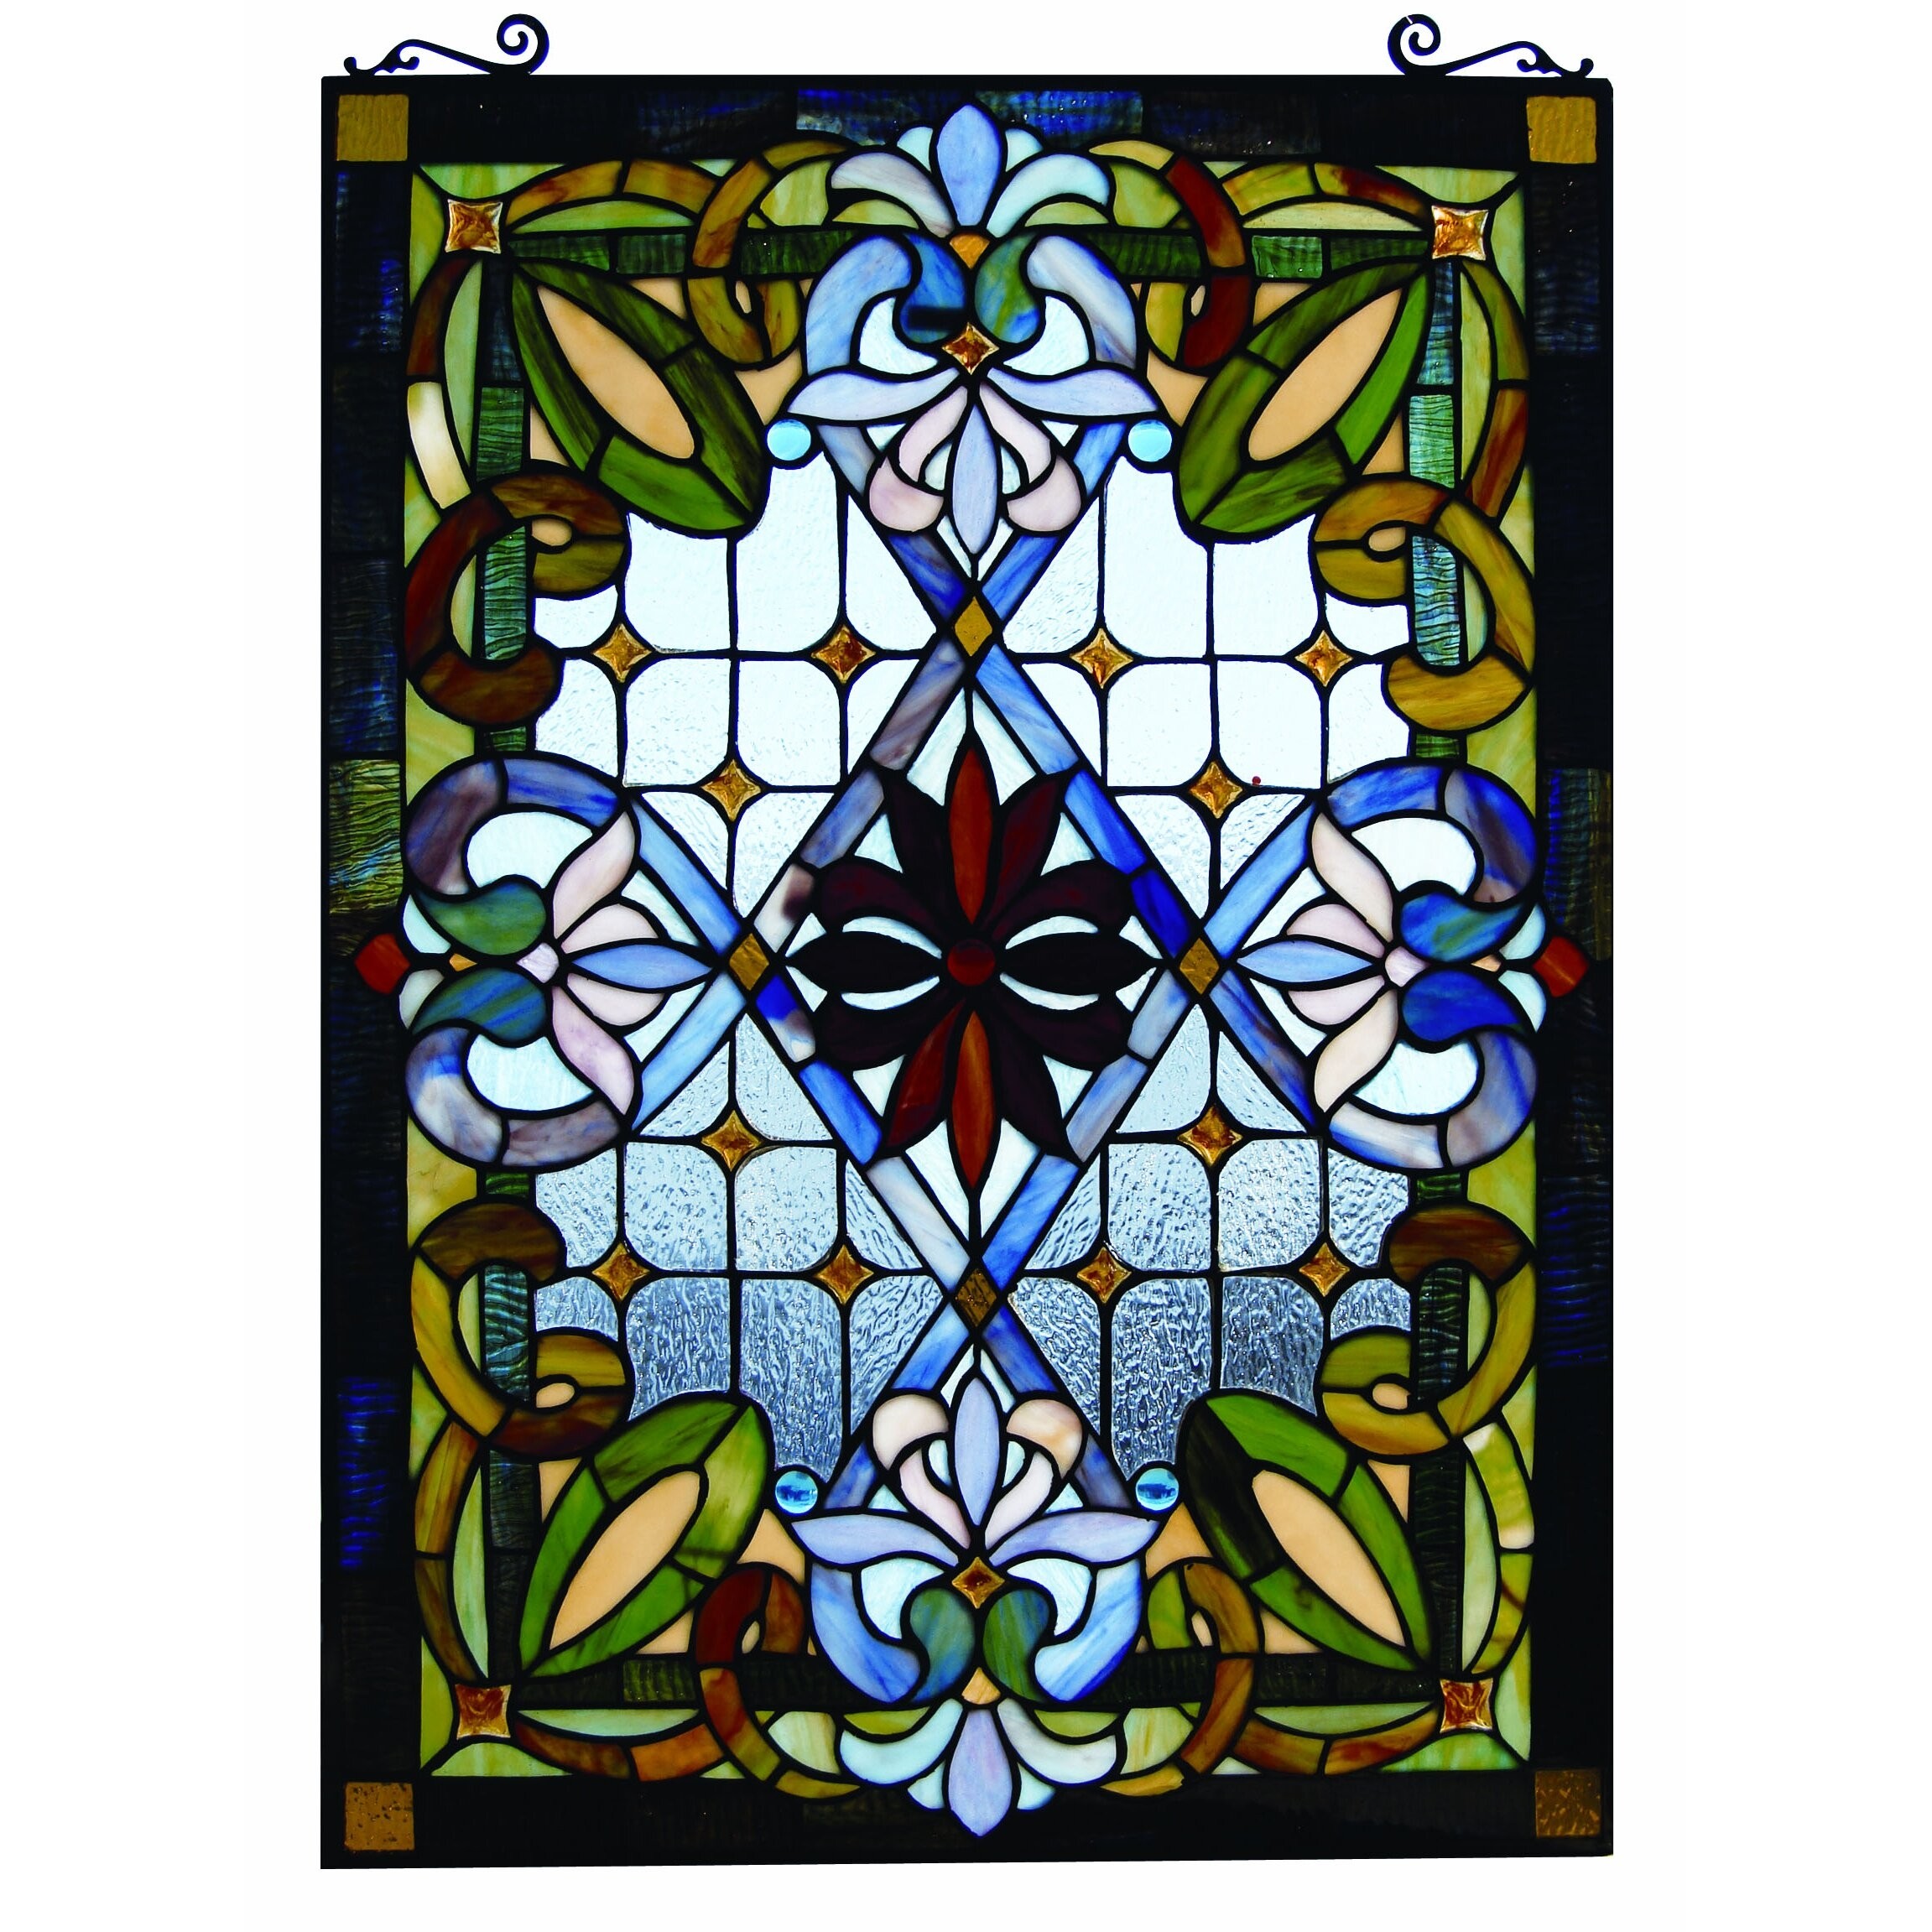 Details about   Victorian Style Design Hanging Stained Glass Window Panel Home Decor 20"x20" 